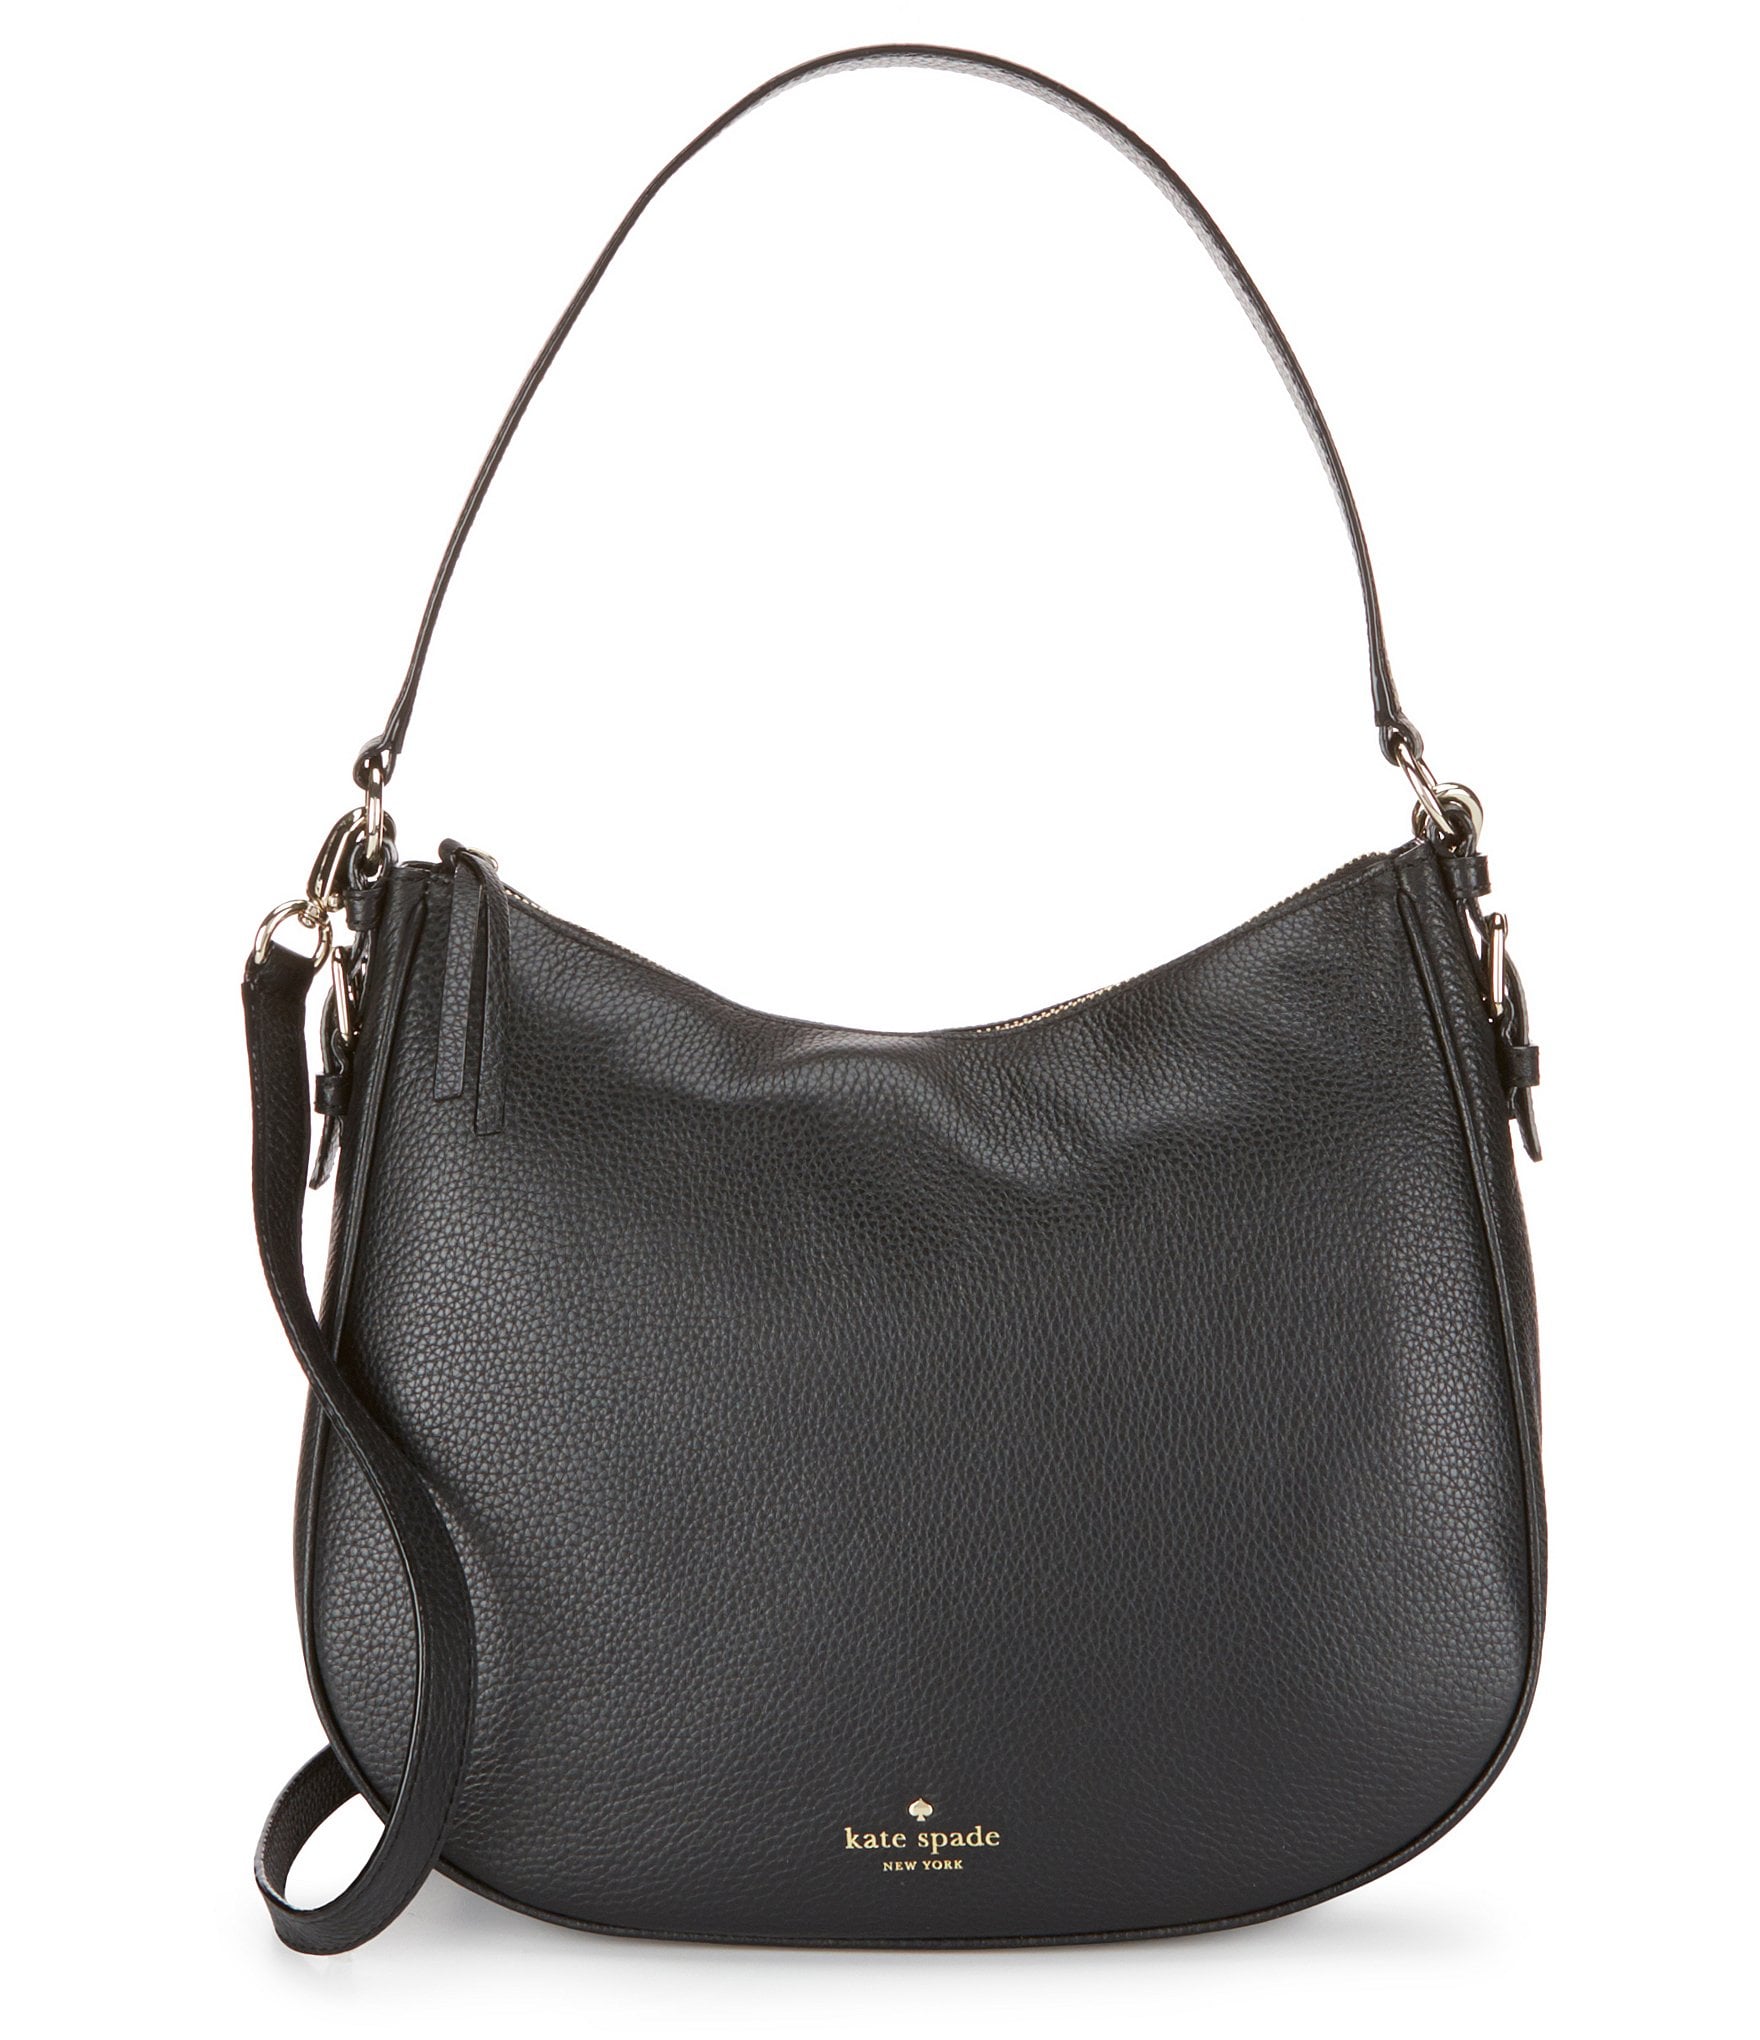 kate spade new york Cobble Hill Collection Mylie Hobo Bag | Dillards